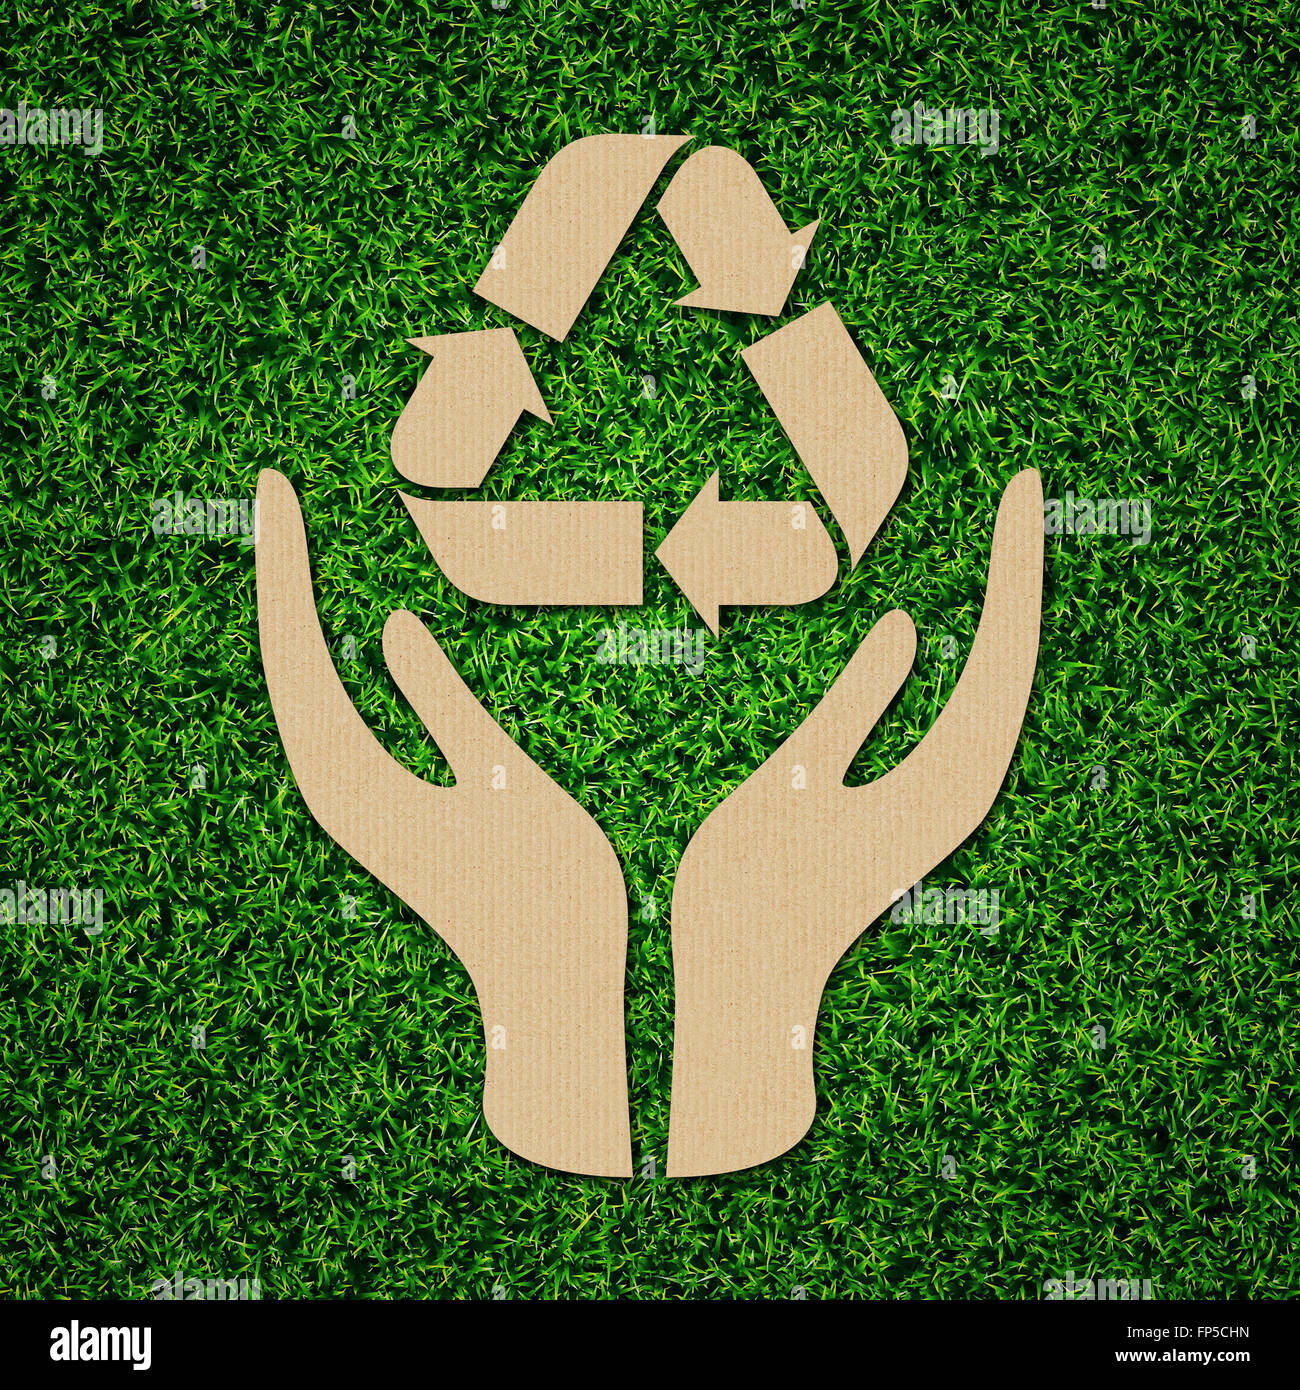 Recycle, reduce, reuse icon symbol concept on green grass. Stock Photo